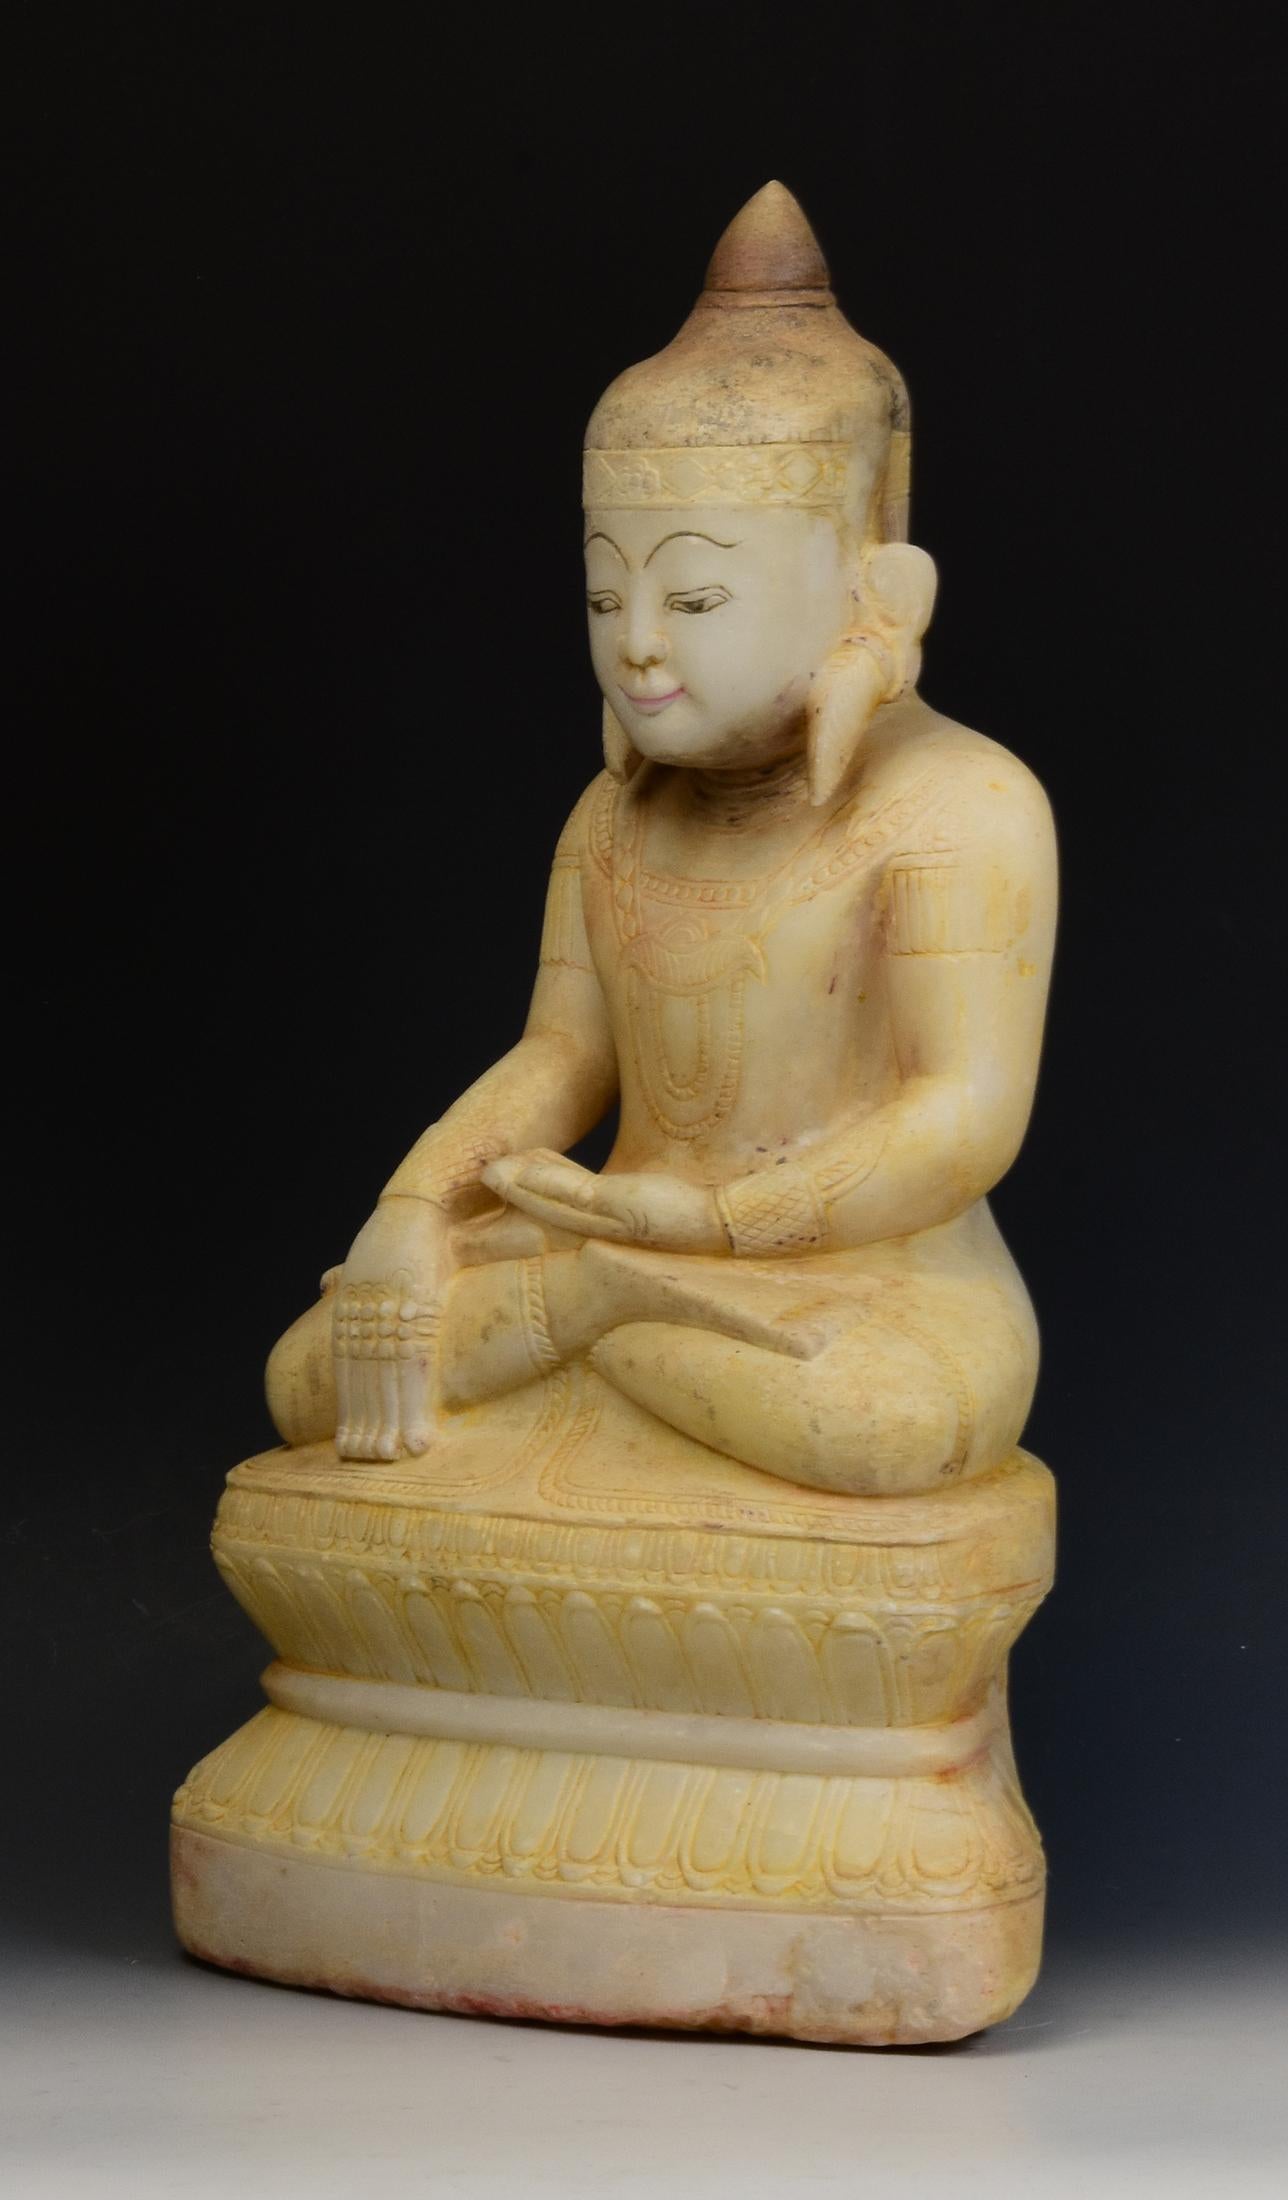 15th Century, Ava, Antique Burmese Alabaster Marble Seated Crowned Buddha Statue 8